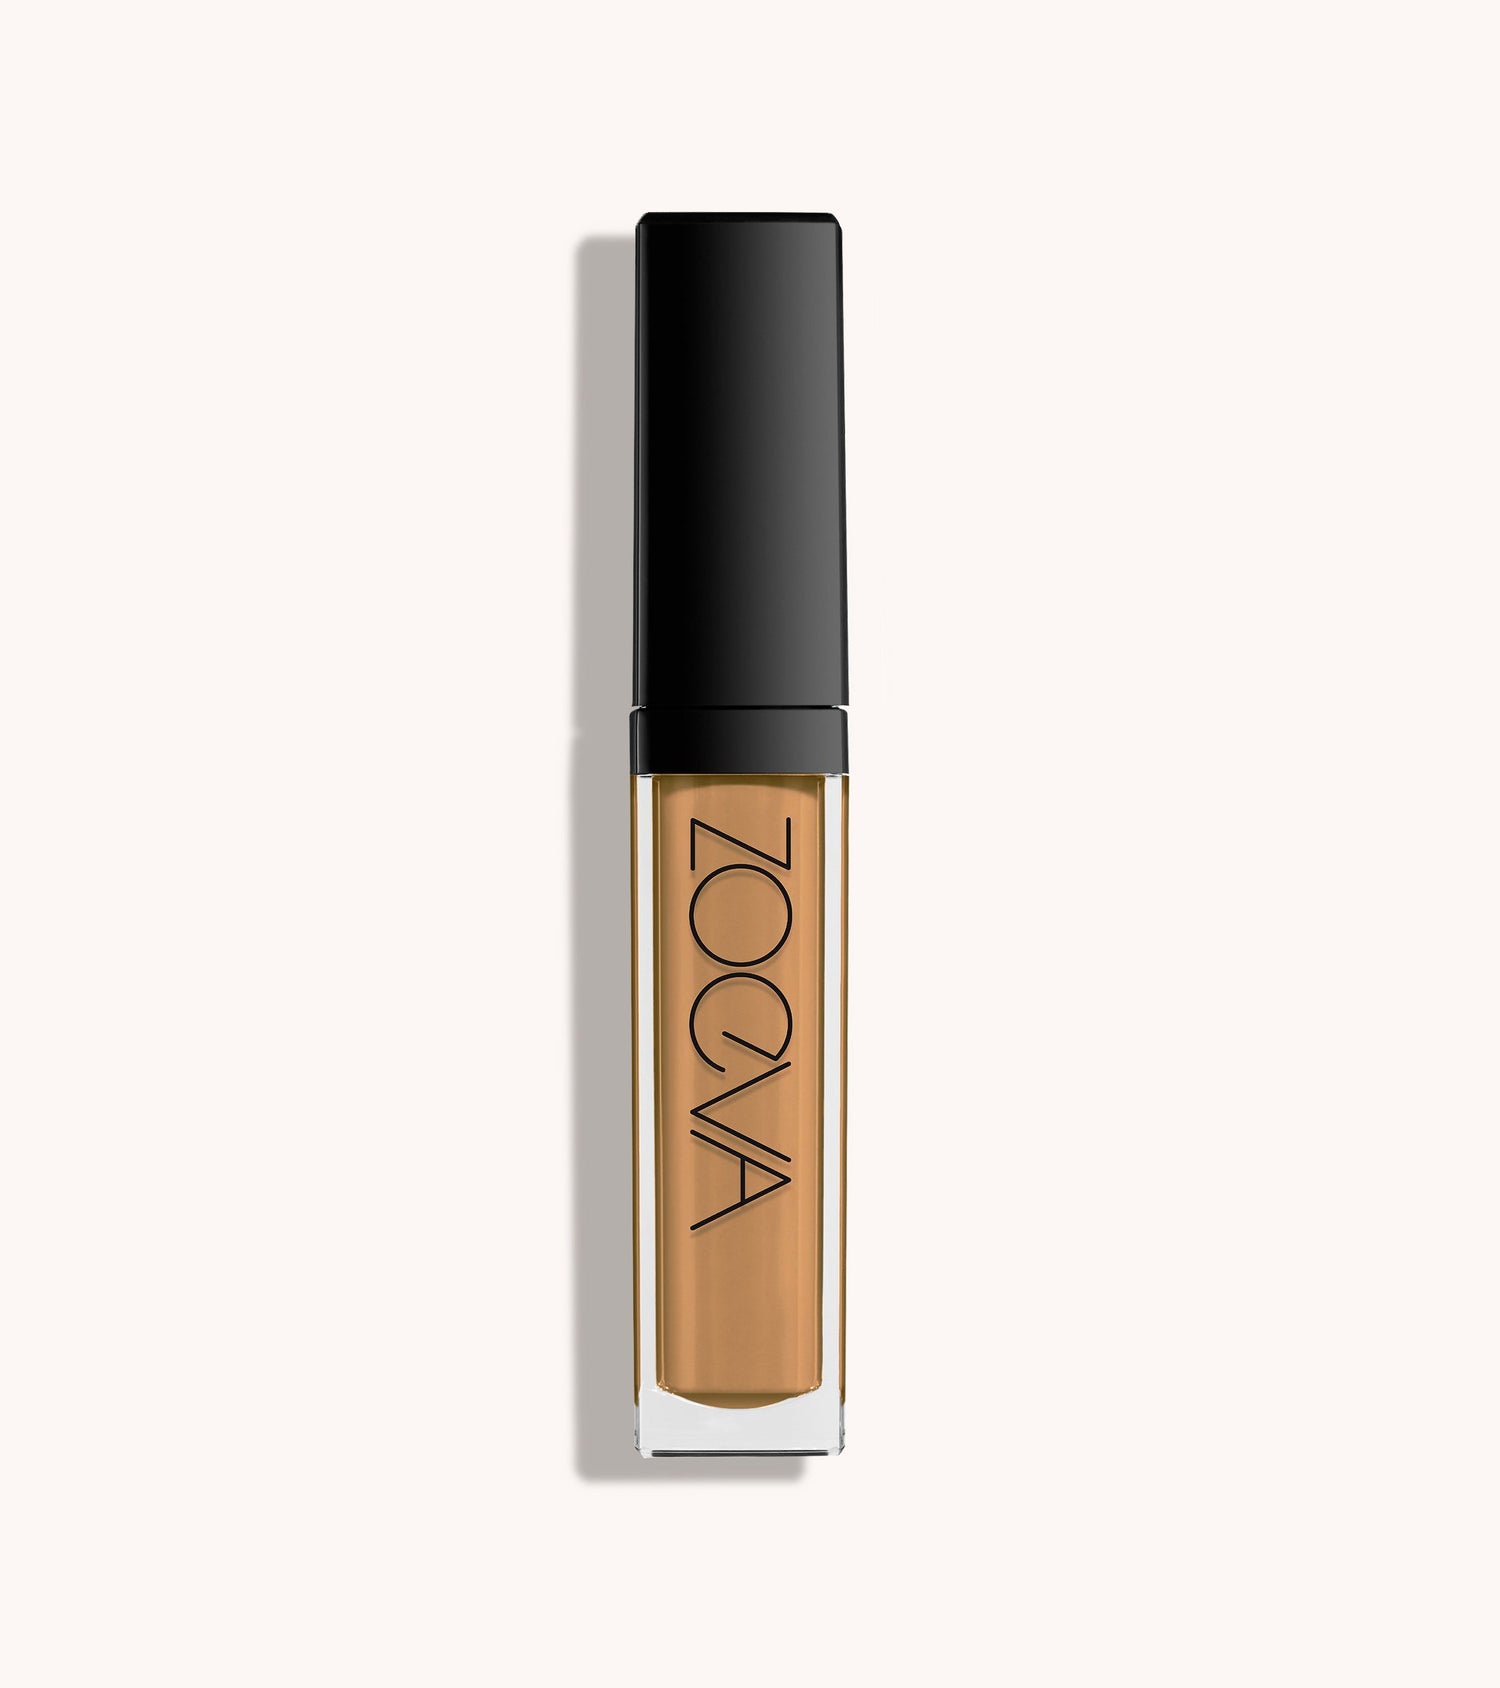 Authentik Skin Perfector Concealer (200 Present) Main Image featured